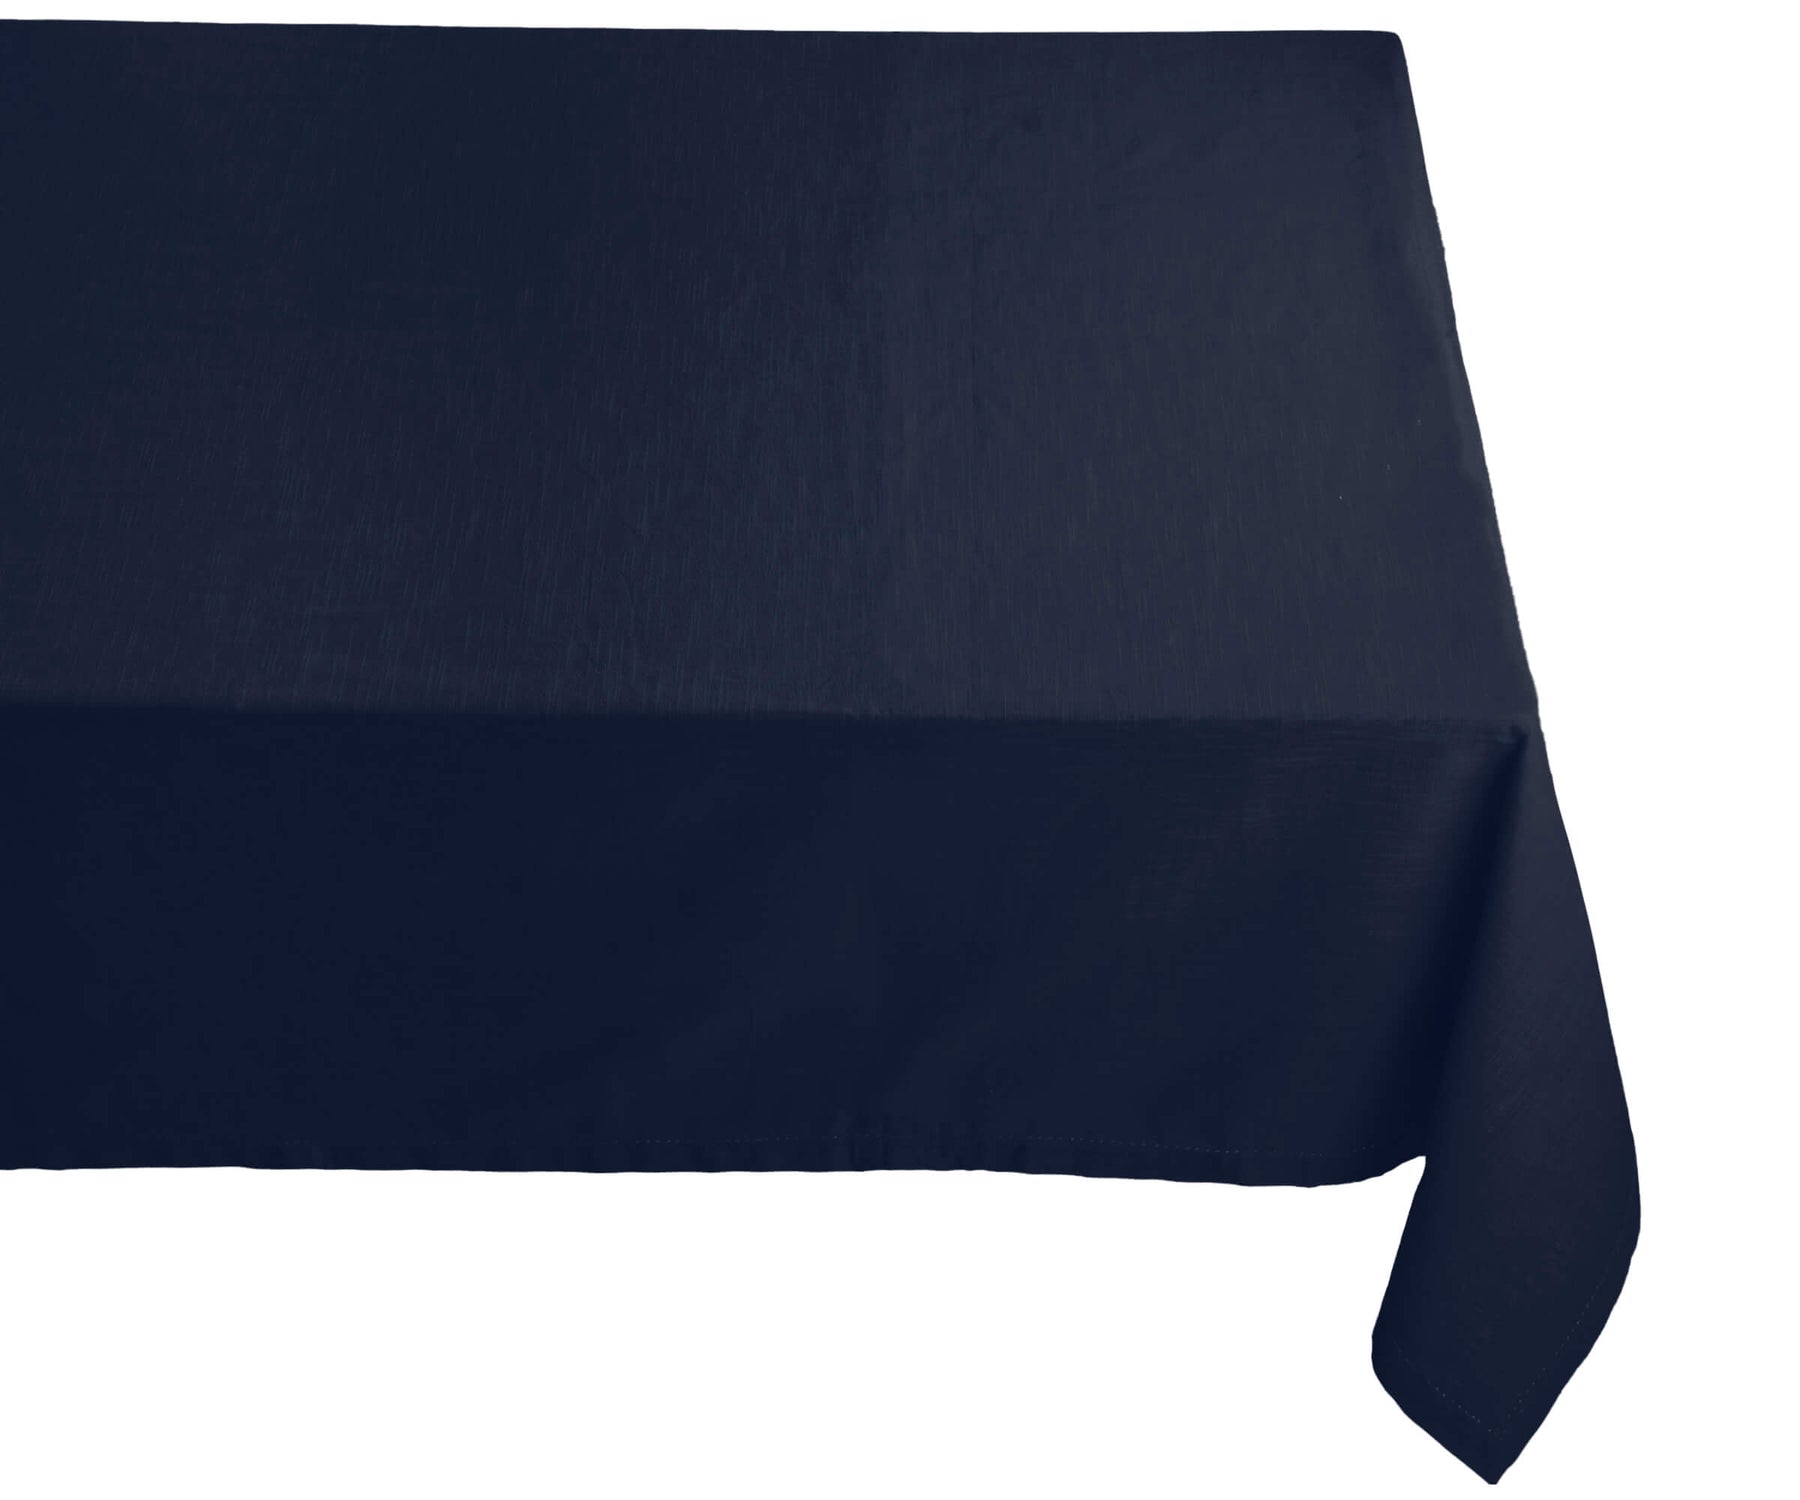 rectangle blue tablecloth - Farmhouse tablecloth which  features oilcloth tablelcoth that are hemstitched.